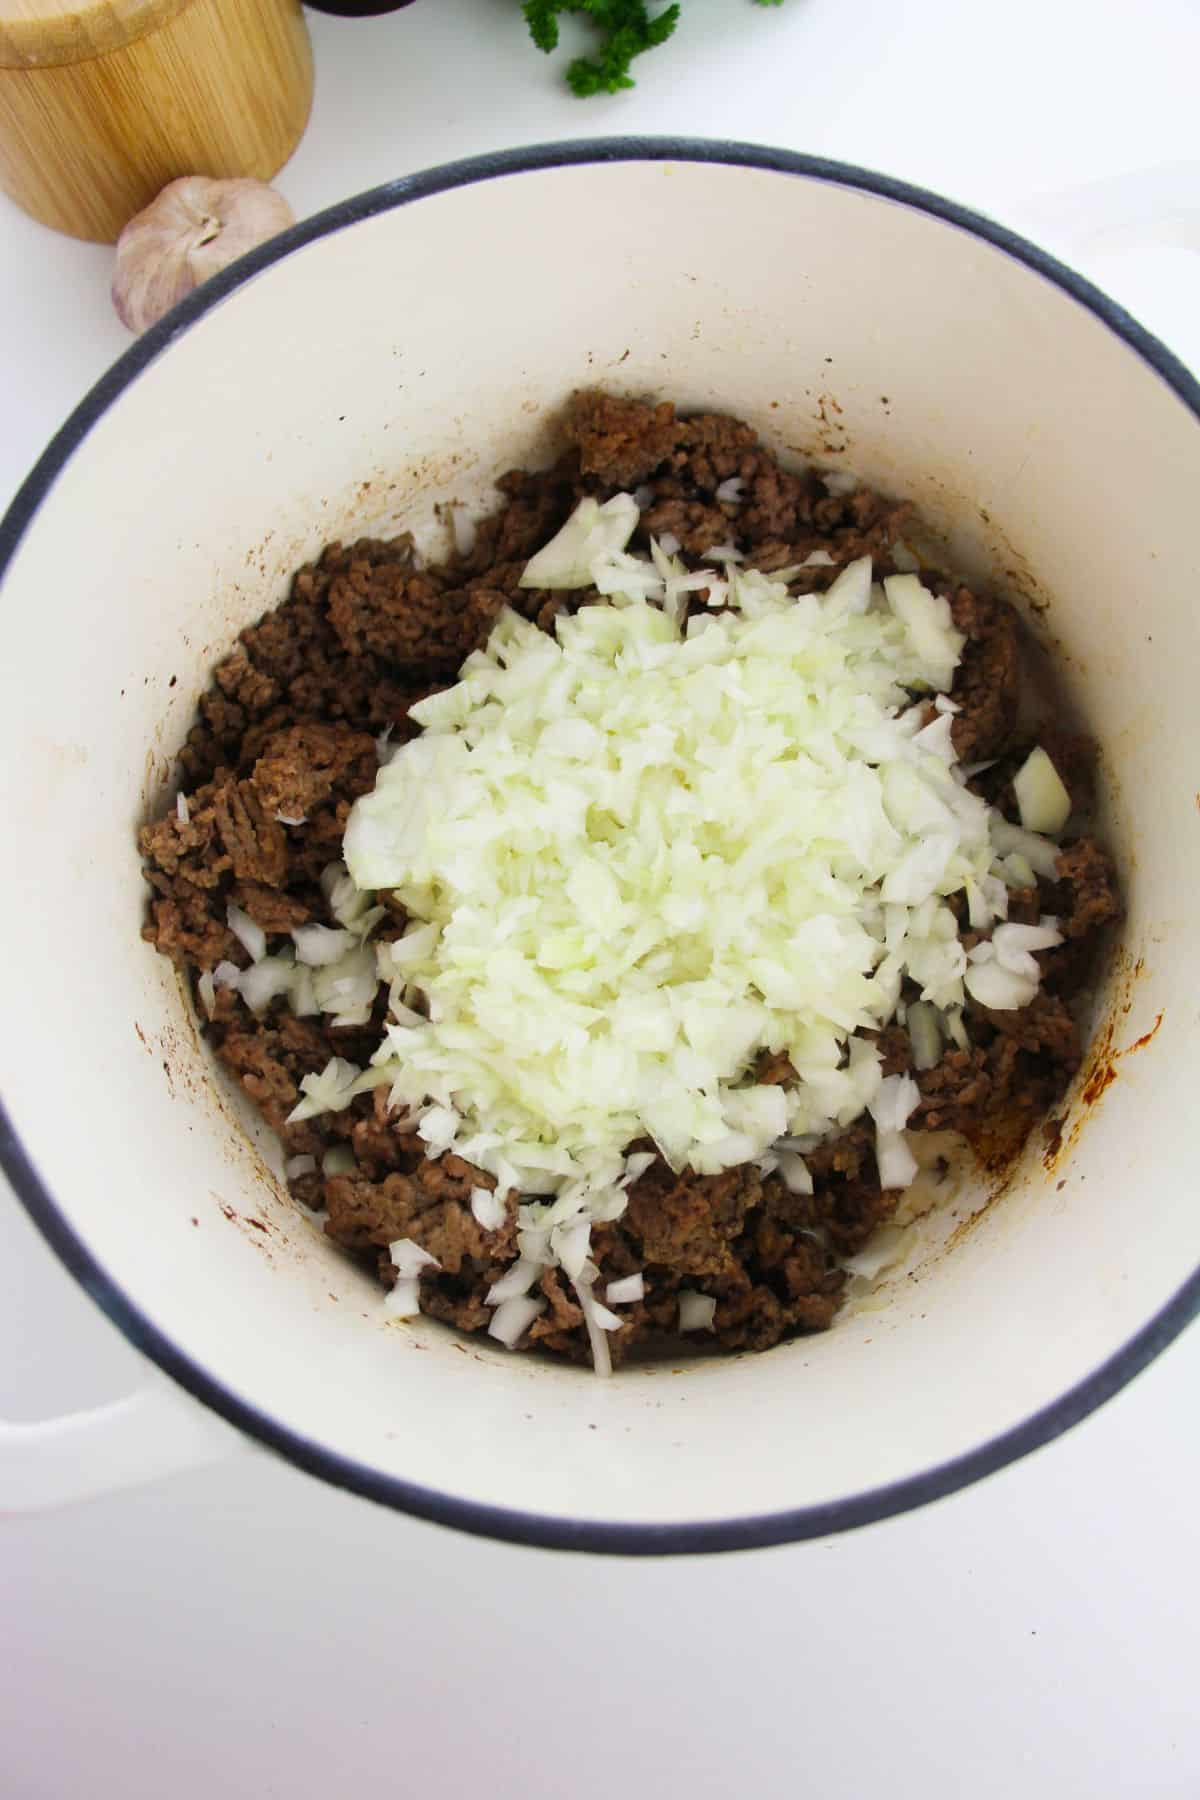 Onion and garlic are added to the ground beef.